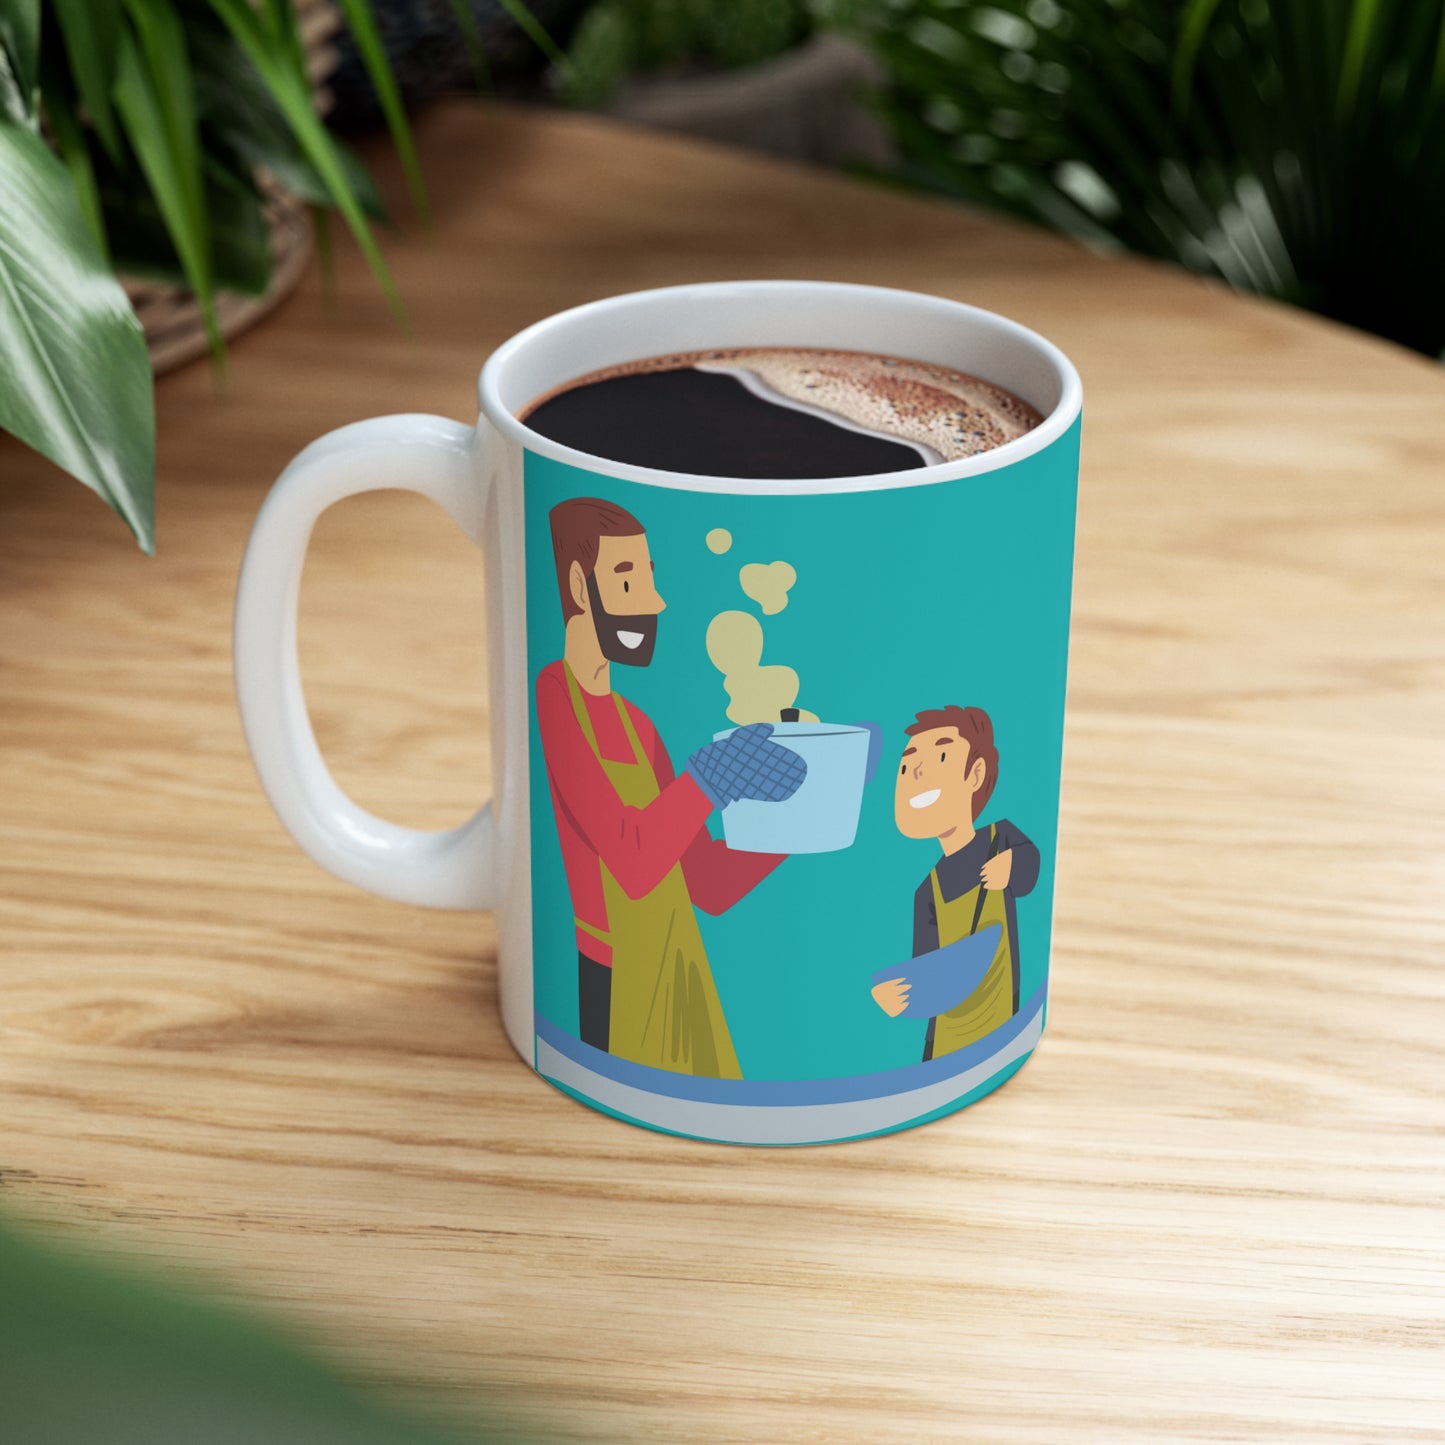 “BEST DAD EVER” on one side and a dad cooking happily with his kid. Part of several mugs to choose from depending on what resonates with you.